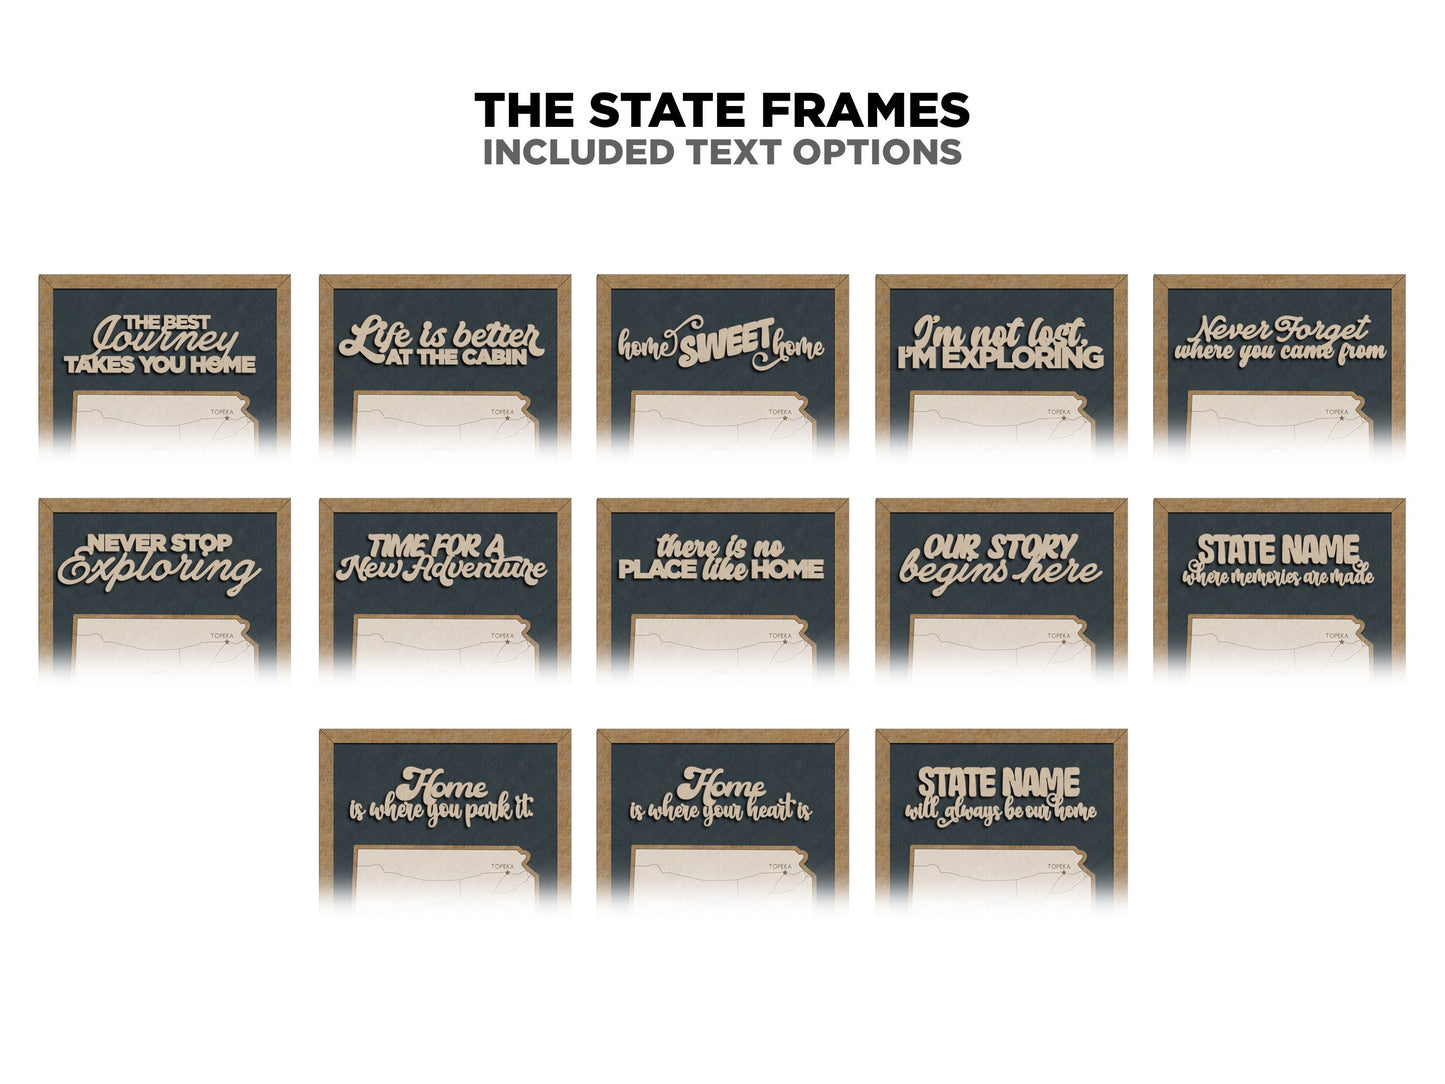 The Arizona State Frame - 13 text options, 12 backgrounds, 25 icons Included - Make over 7,500 designs - Glowforge & Lightburn Tested